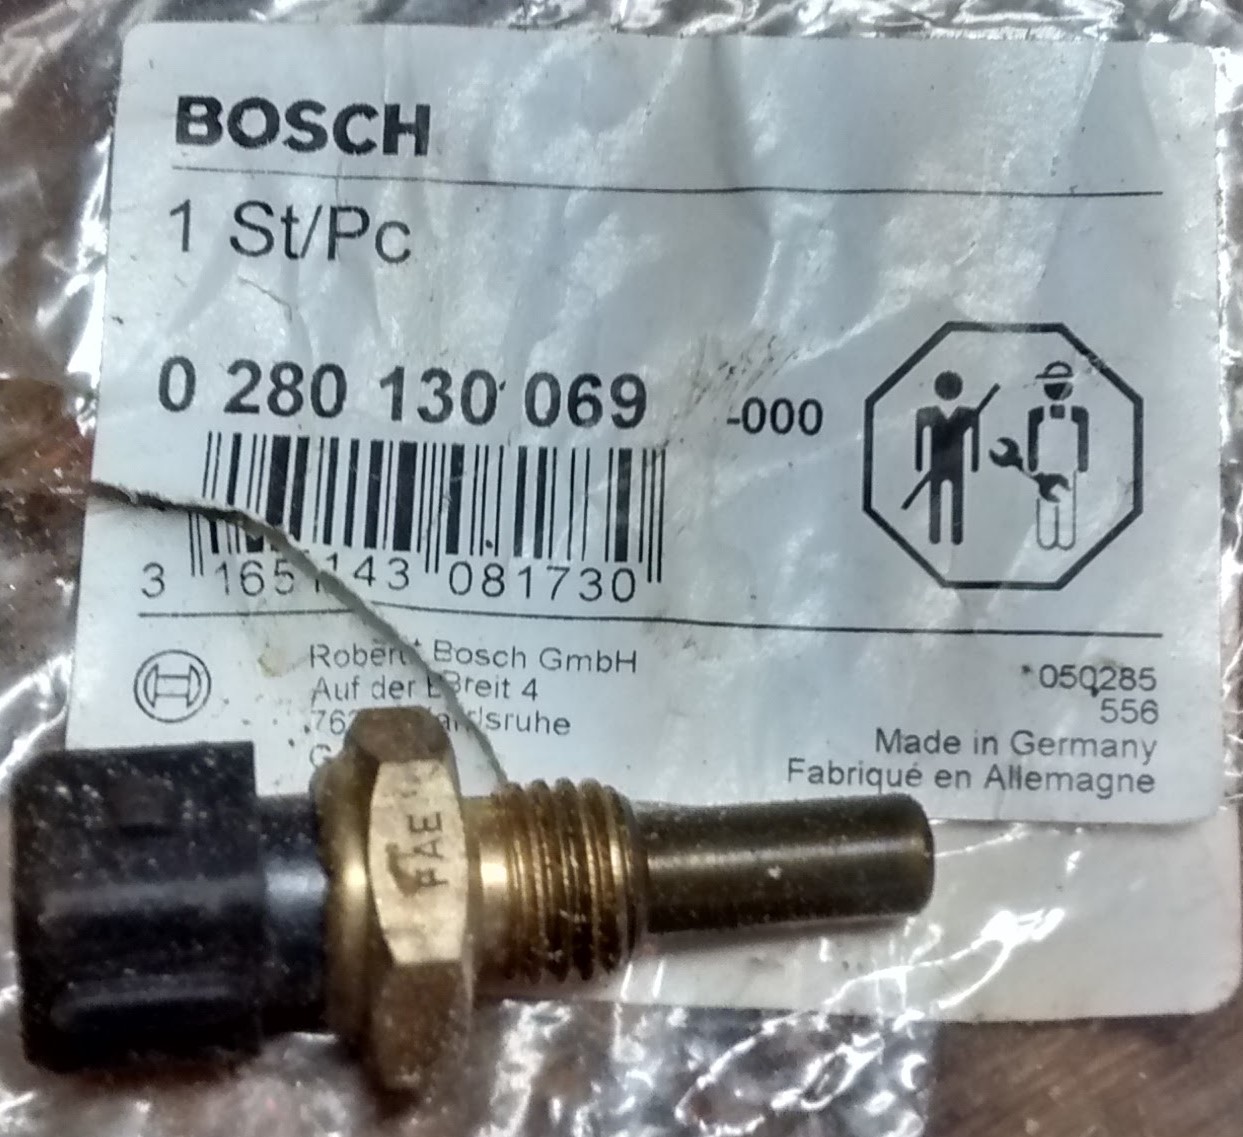 A Bosch engine coolant temperature sensor for a 1995 Volvo 940.  The label shows that it should only be handled by professionals, which is nonesense, because it just takes a single ~19mm socket to install.